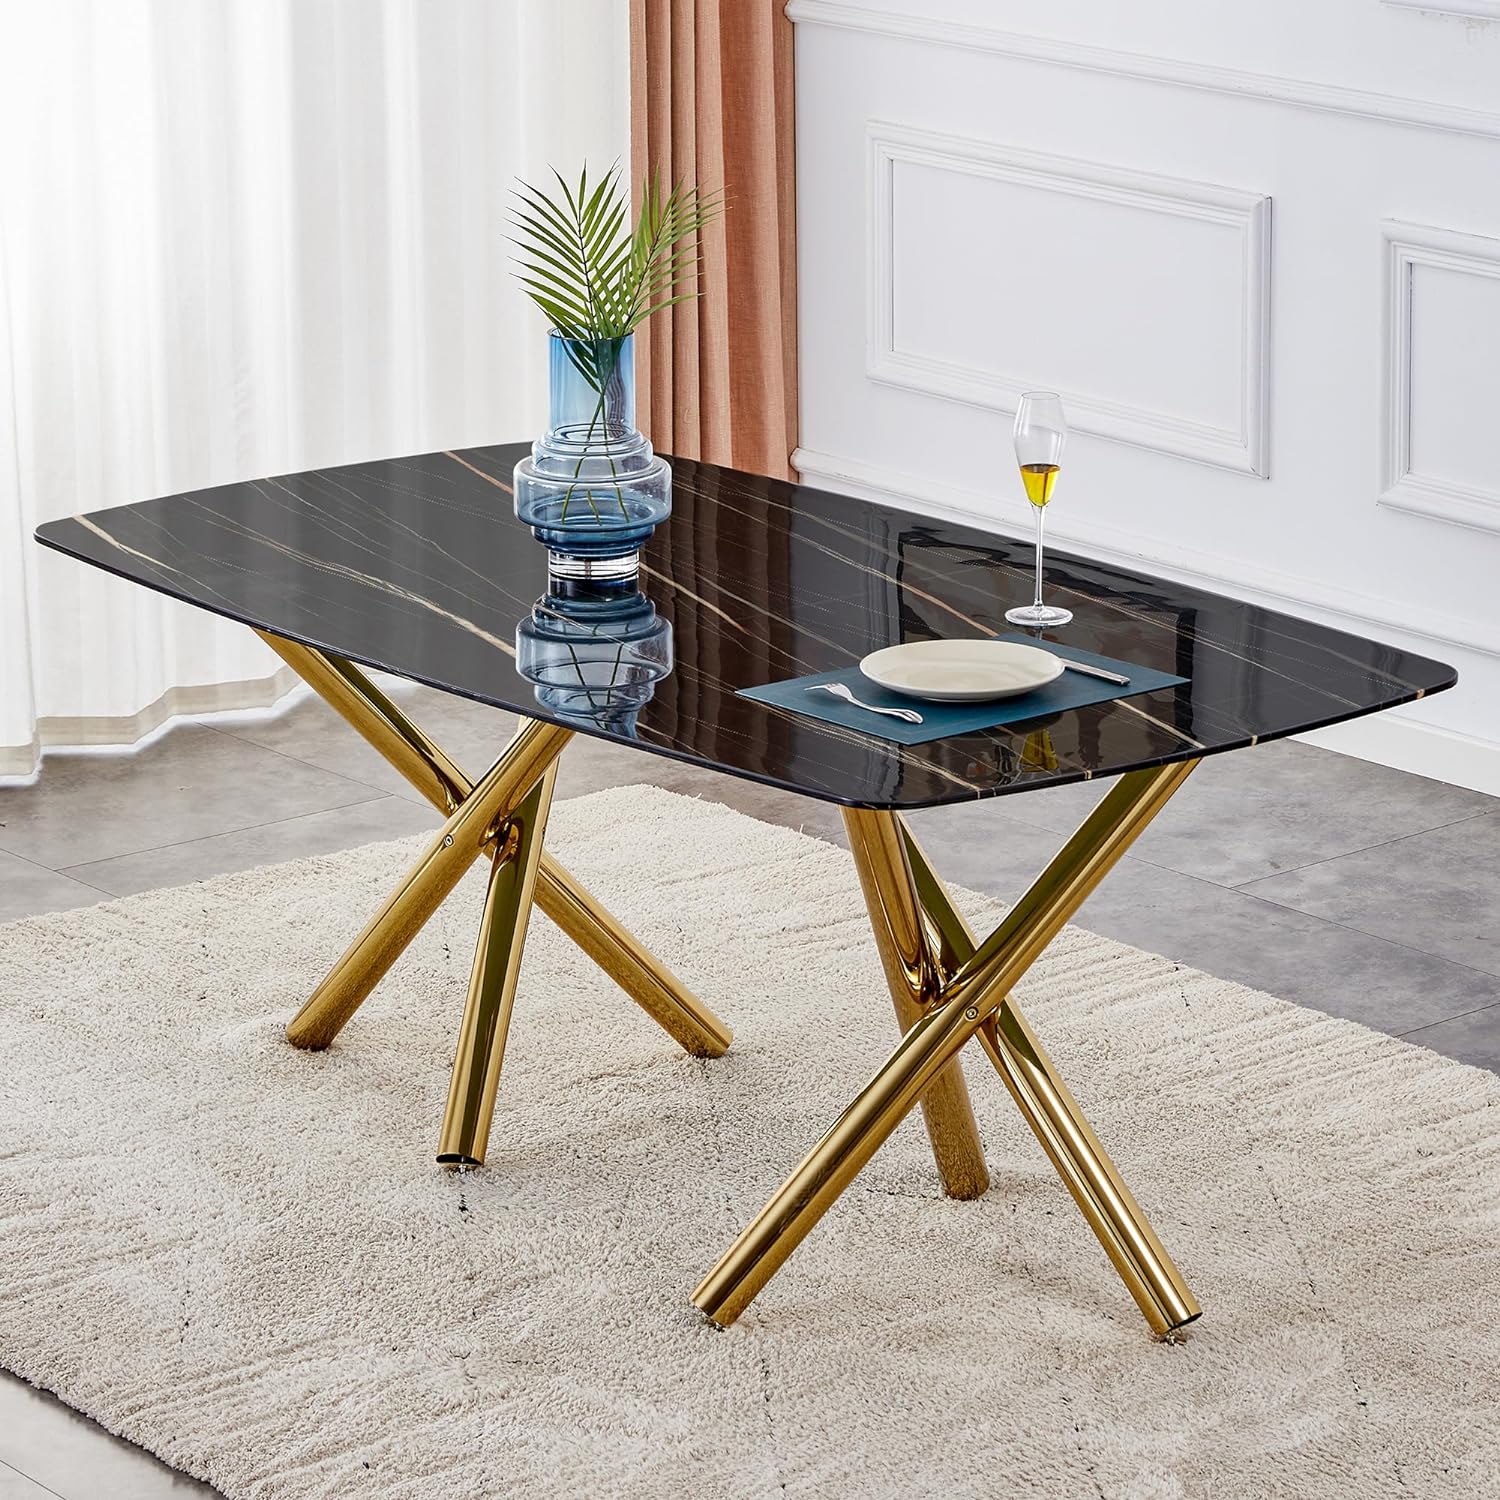 WILLIAMSPACE 70.9 Glass Dining Table with Imitation Marble Desktop and Golden Metal Legs, Modern Kitchen Dining Table for 6-8 Person, Rectangular Dining Table for Dining Room Living Room - Black